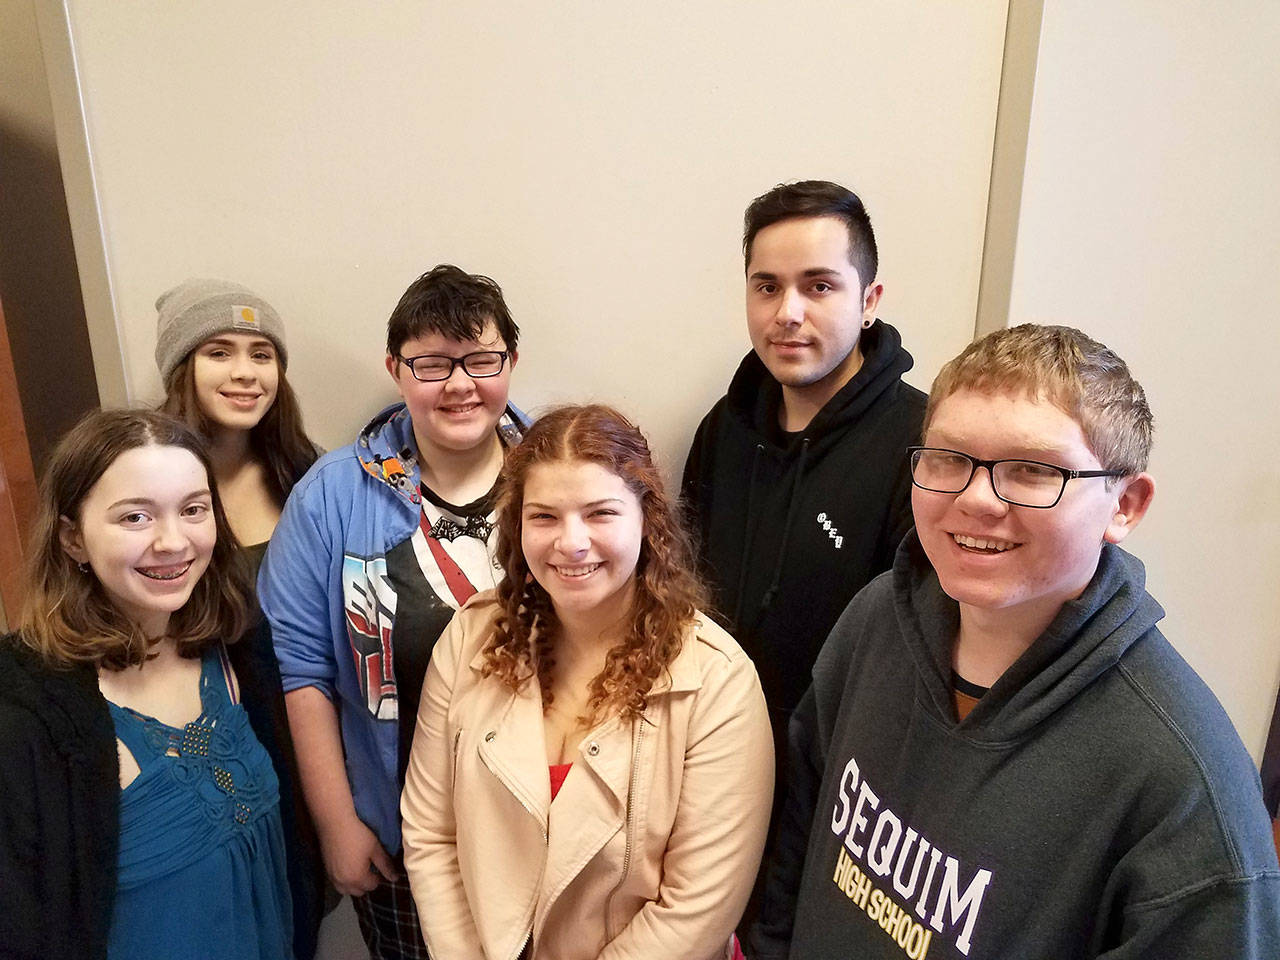 Students in Michelle Mahitka and Amanda Westman’s Real World/Business English class include (back row, from left) Jenna O’Steen, Hannah O’Leary and Albert Bravo, and (front row, from left) Elizabeth Roth, Brittany Jensen and Brandon Jensen. Submitted photo